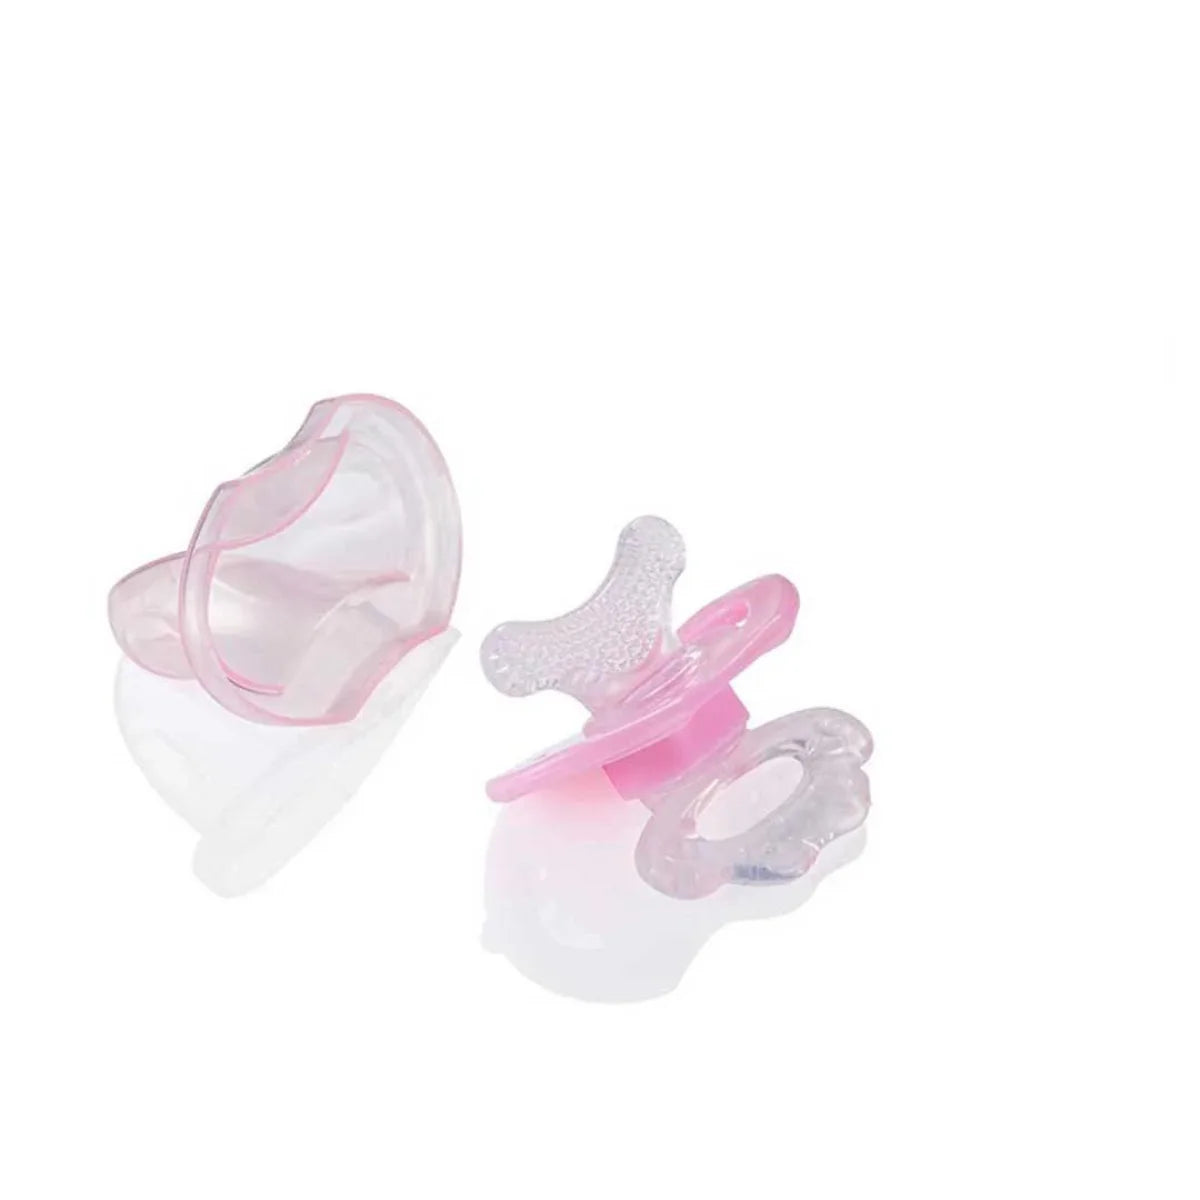 pink frontease silicon baby teether for babies